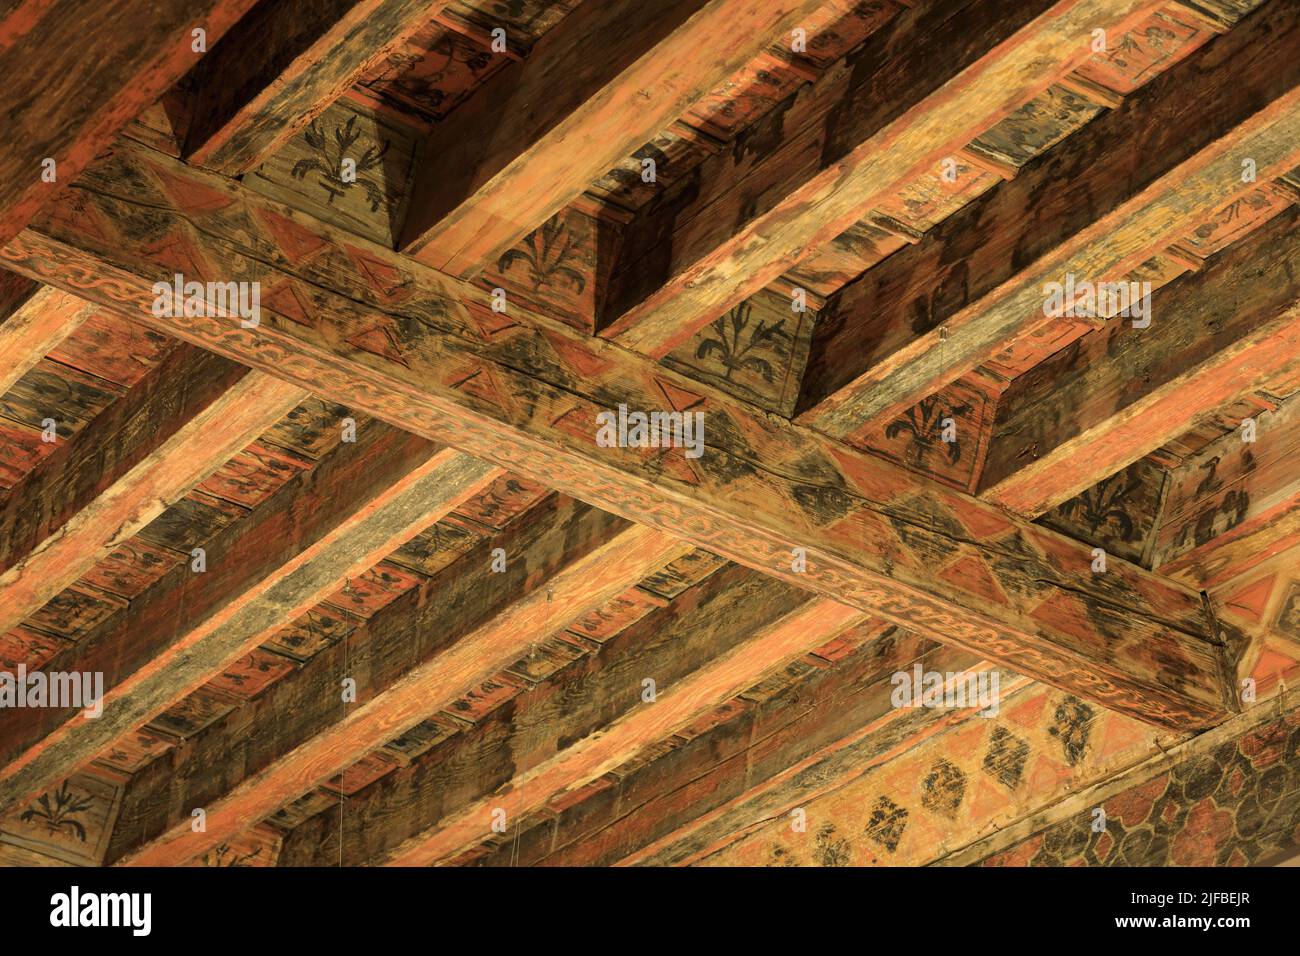 France, Vaucluse, Avignon, rue Laboureur, Livrée Ceccano, cardinalice palace (14th century), today municipal library, ceilings and wall decorations in the reading rooms Stock Photo